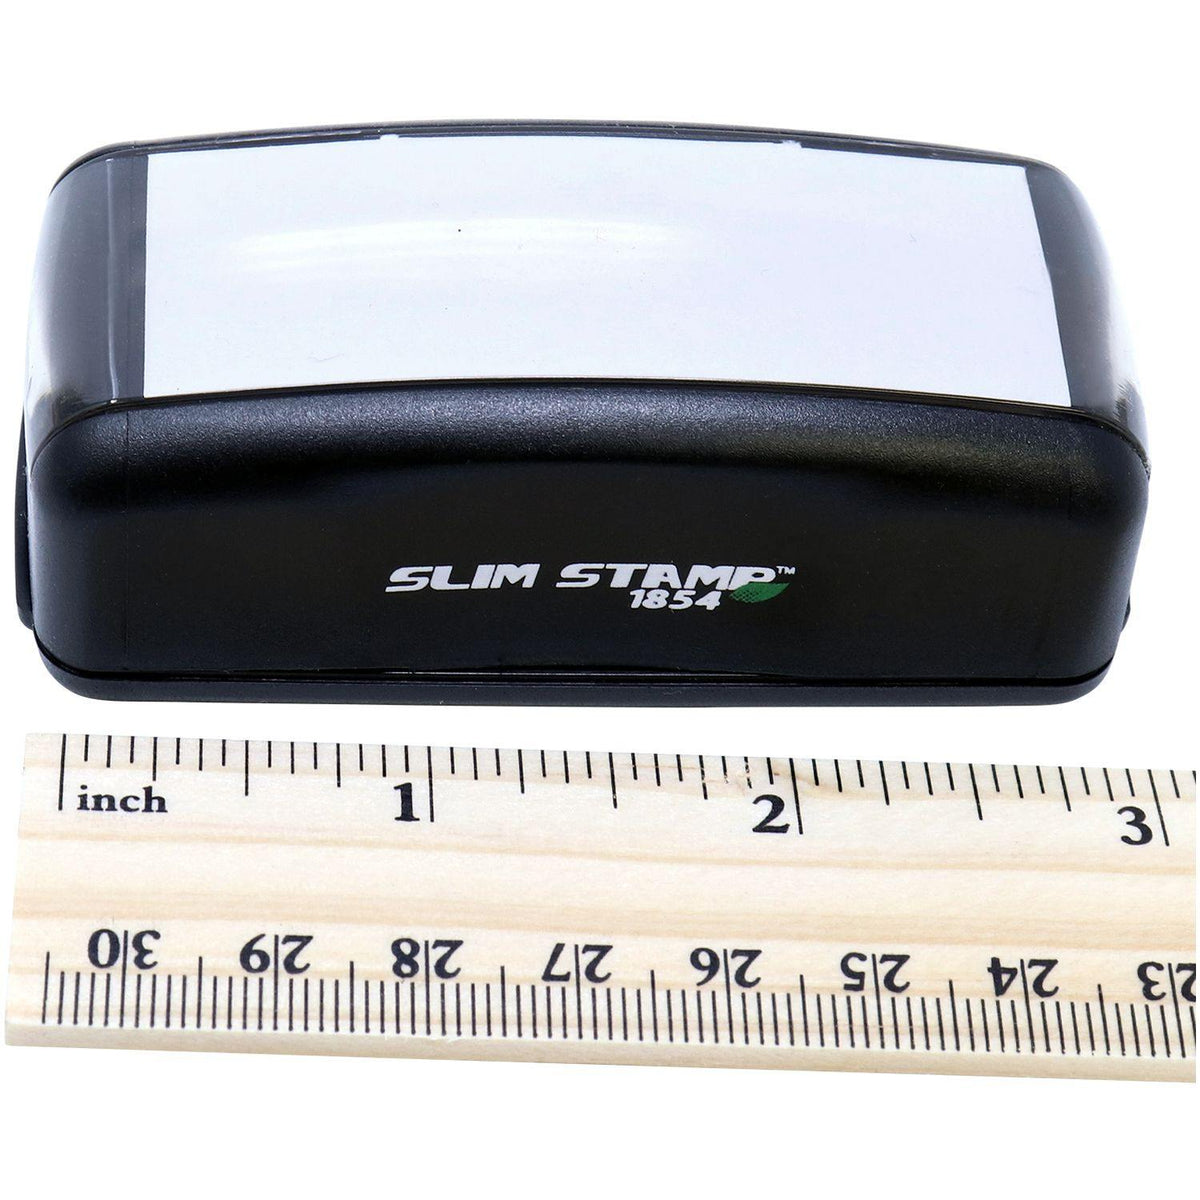 Measurement Large Pre-Inked Strikeout Stamp with Ruler